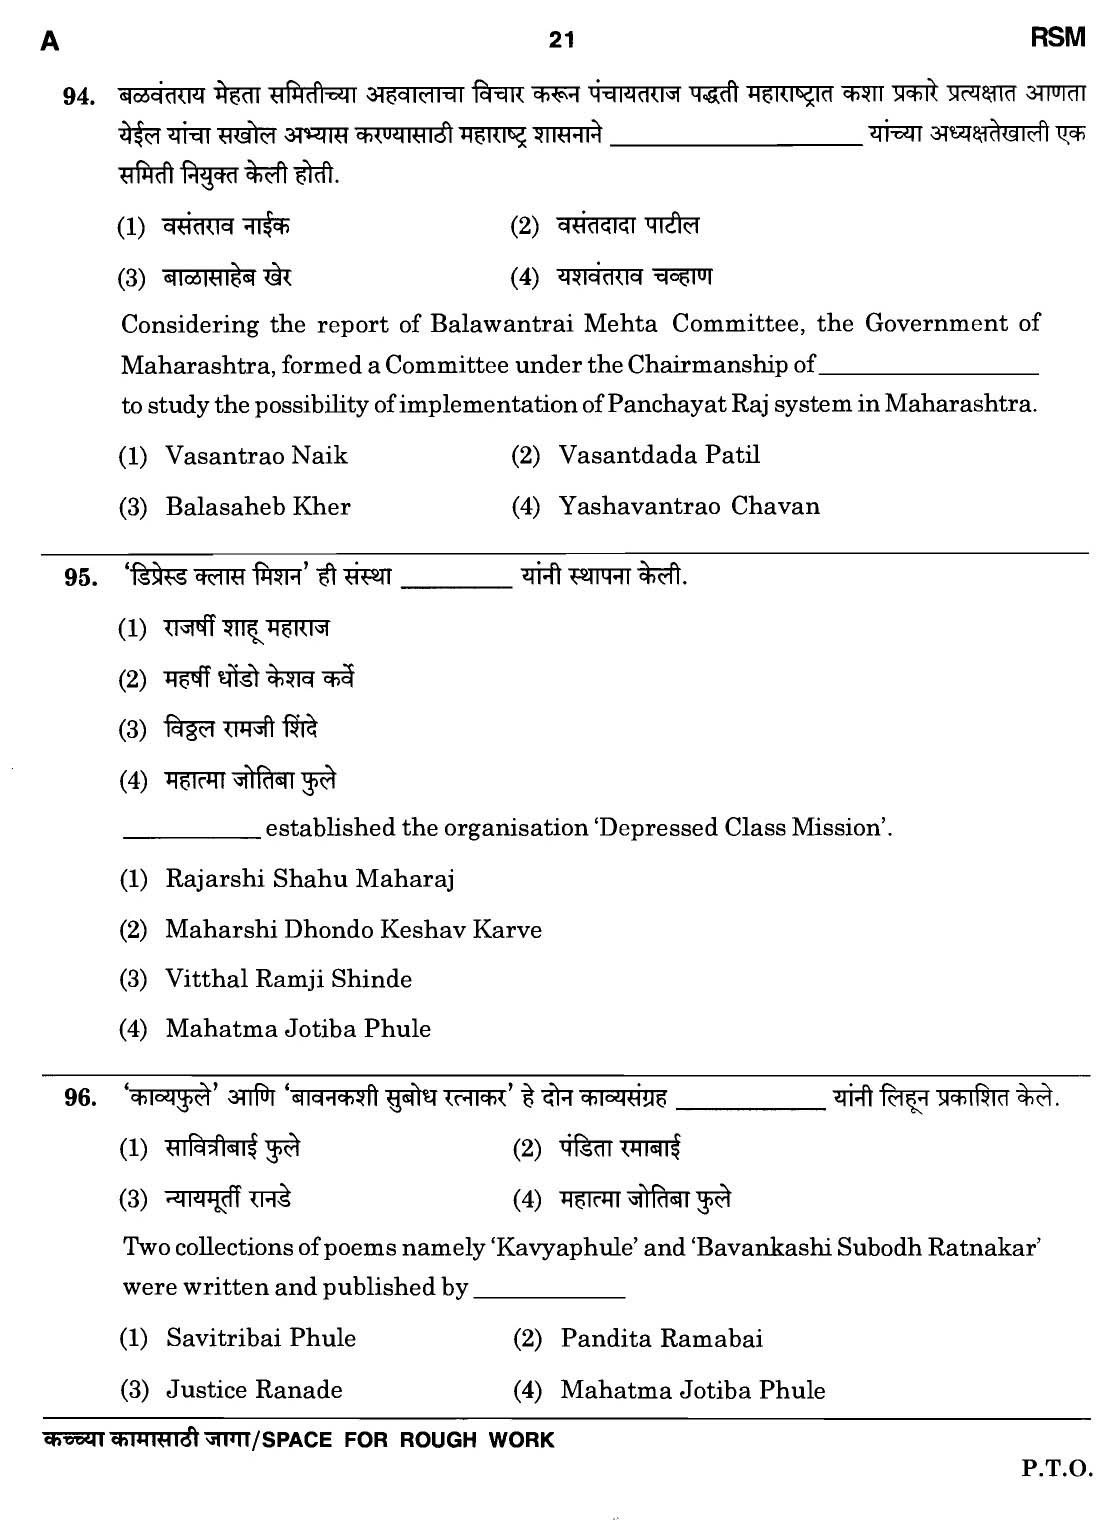 MPSC Agricultural Services Preliminary Exam 2011 Question Paper 20